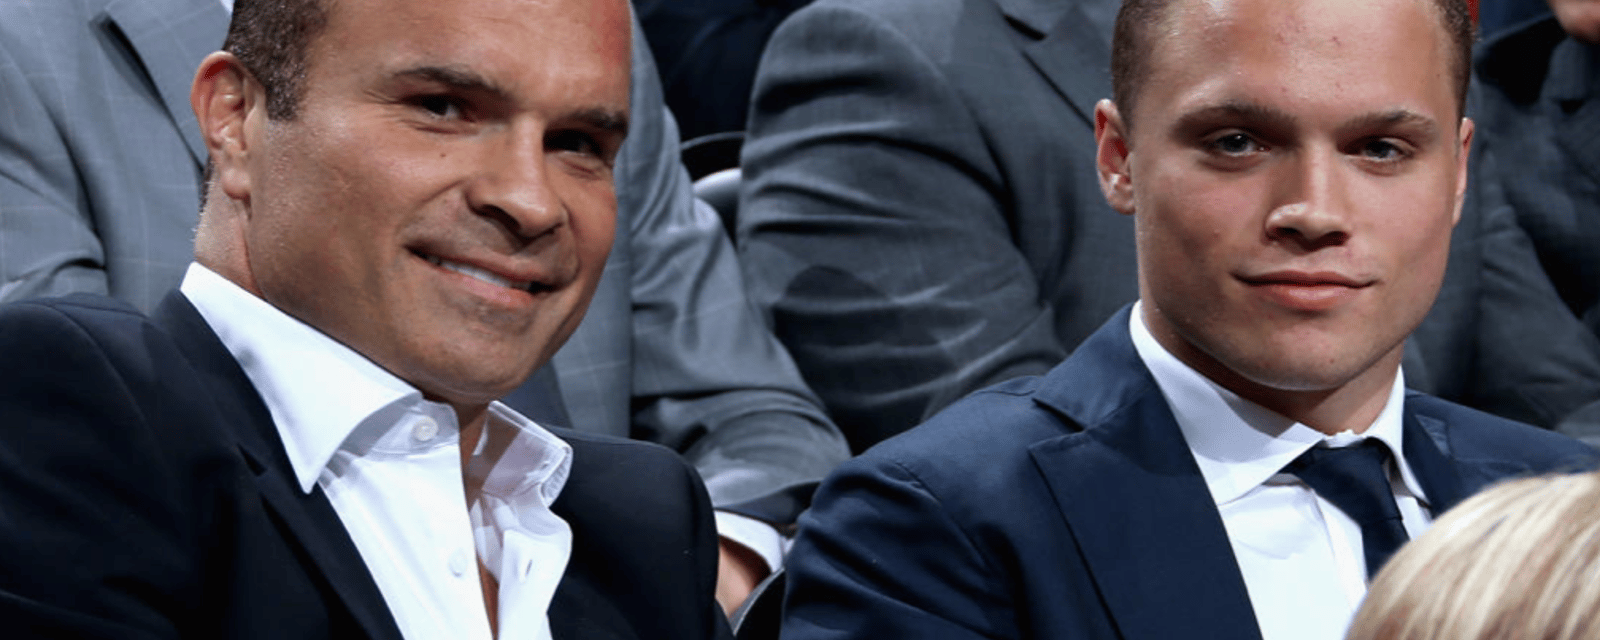 Tie Domi goes viral for reaction to Max Domi fight 